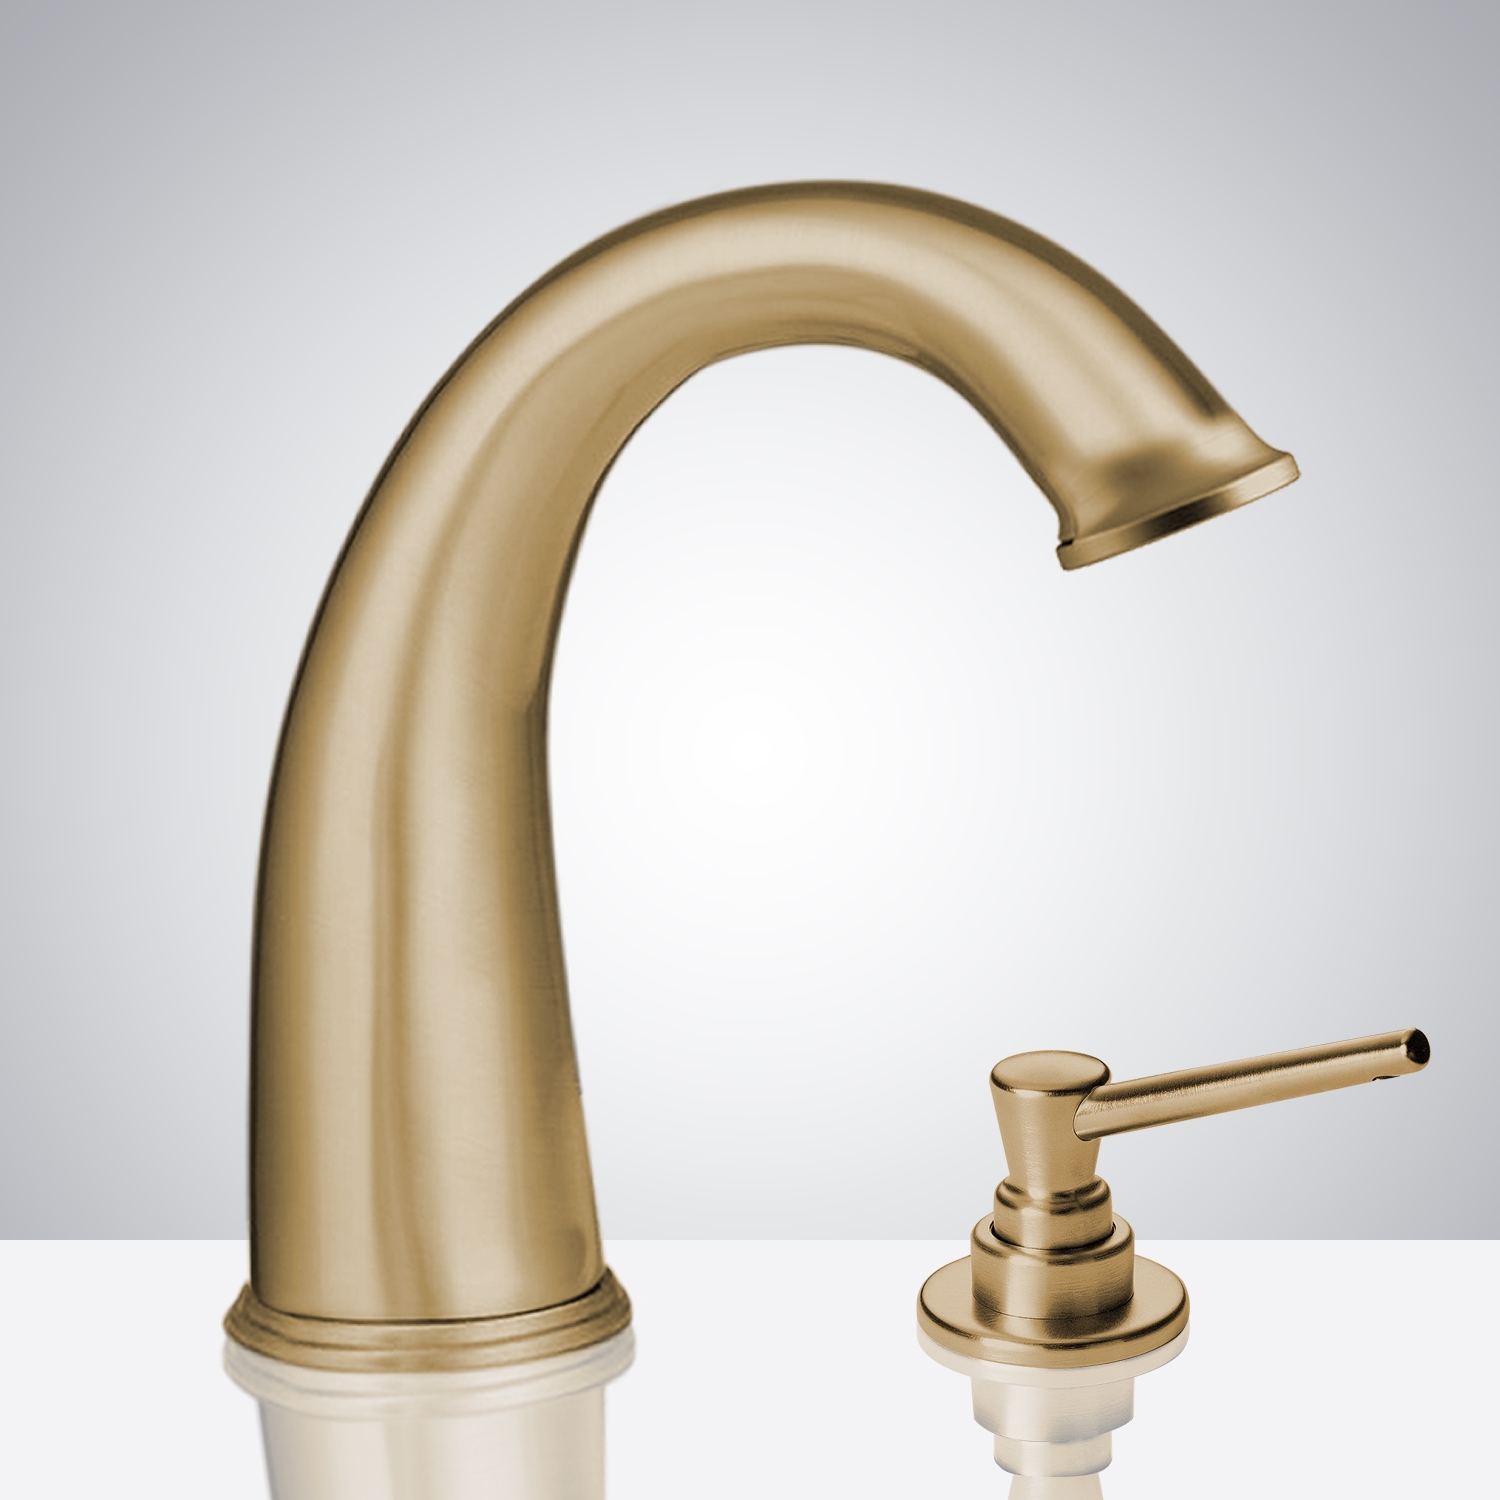 Commercial Brushed Gold Touchless Automatic Sensor Faucet & Manual Soap Dispenser